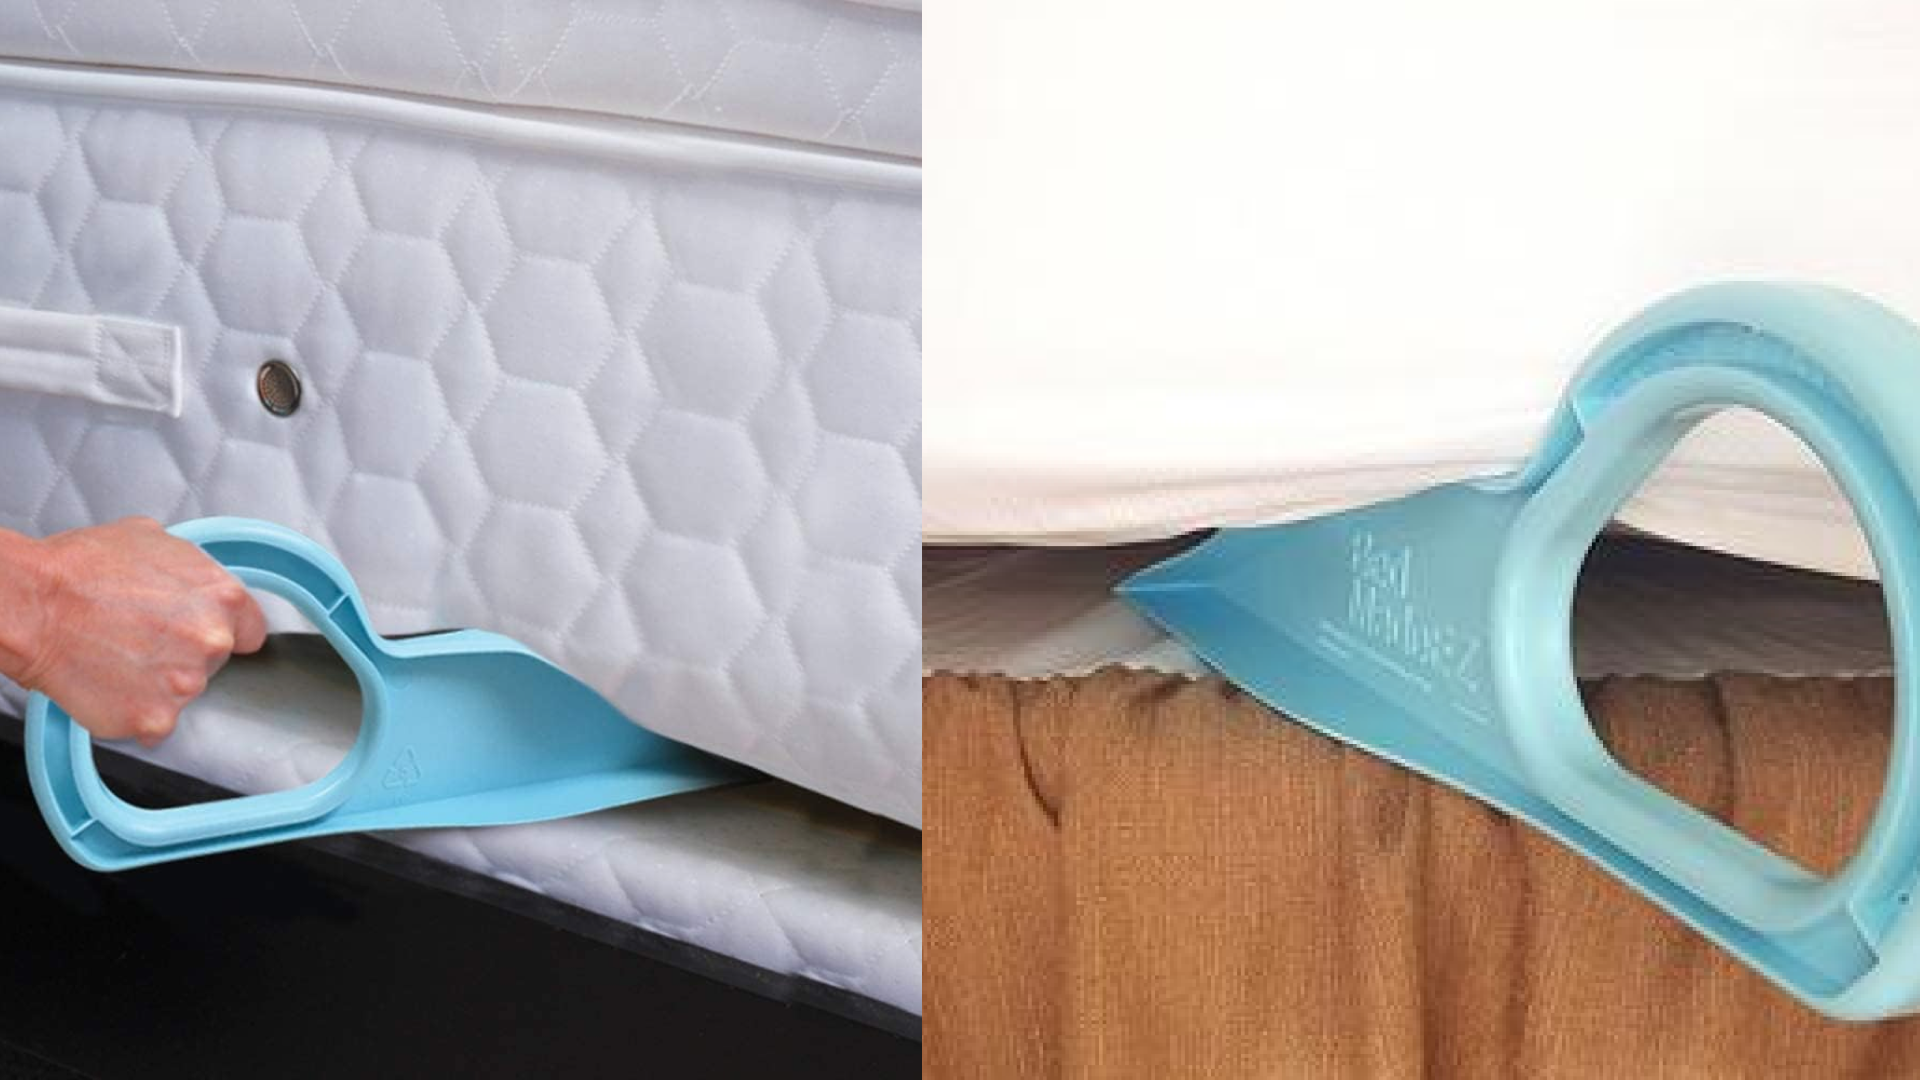 gadget that can help tuck sheets under beds